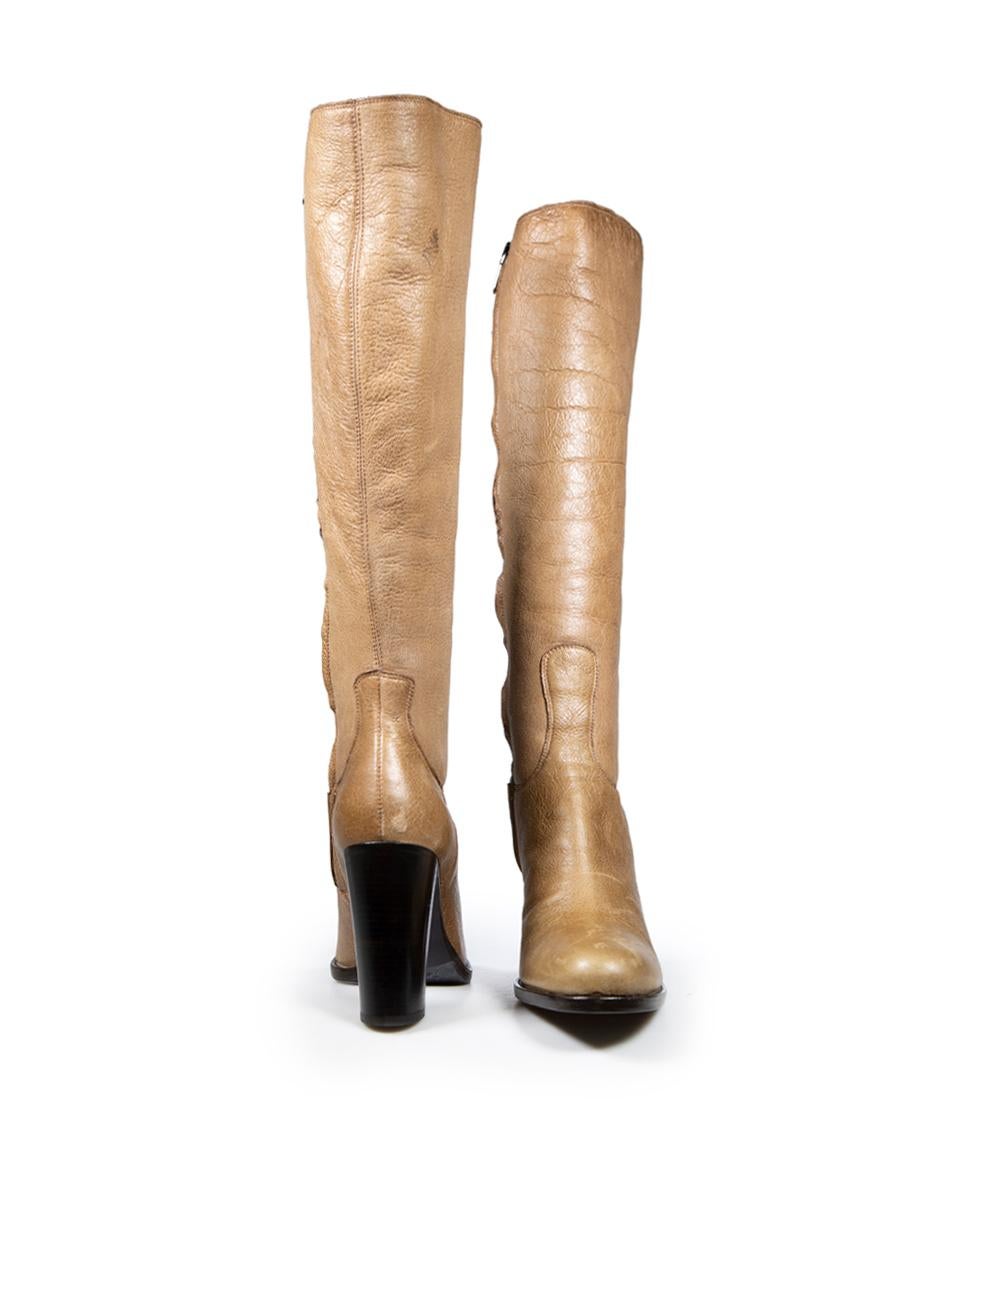 Jil Sander Camel Leather Shearling Knee High Boots Size IT 38.5 In Good Condition For Sale In London, GB